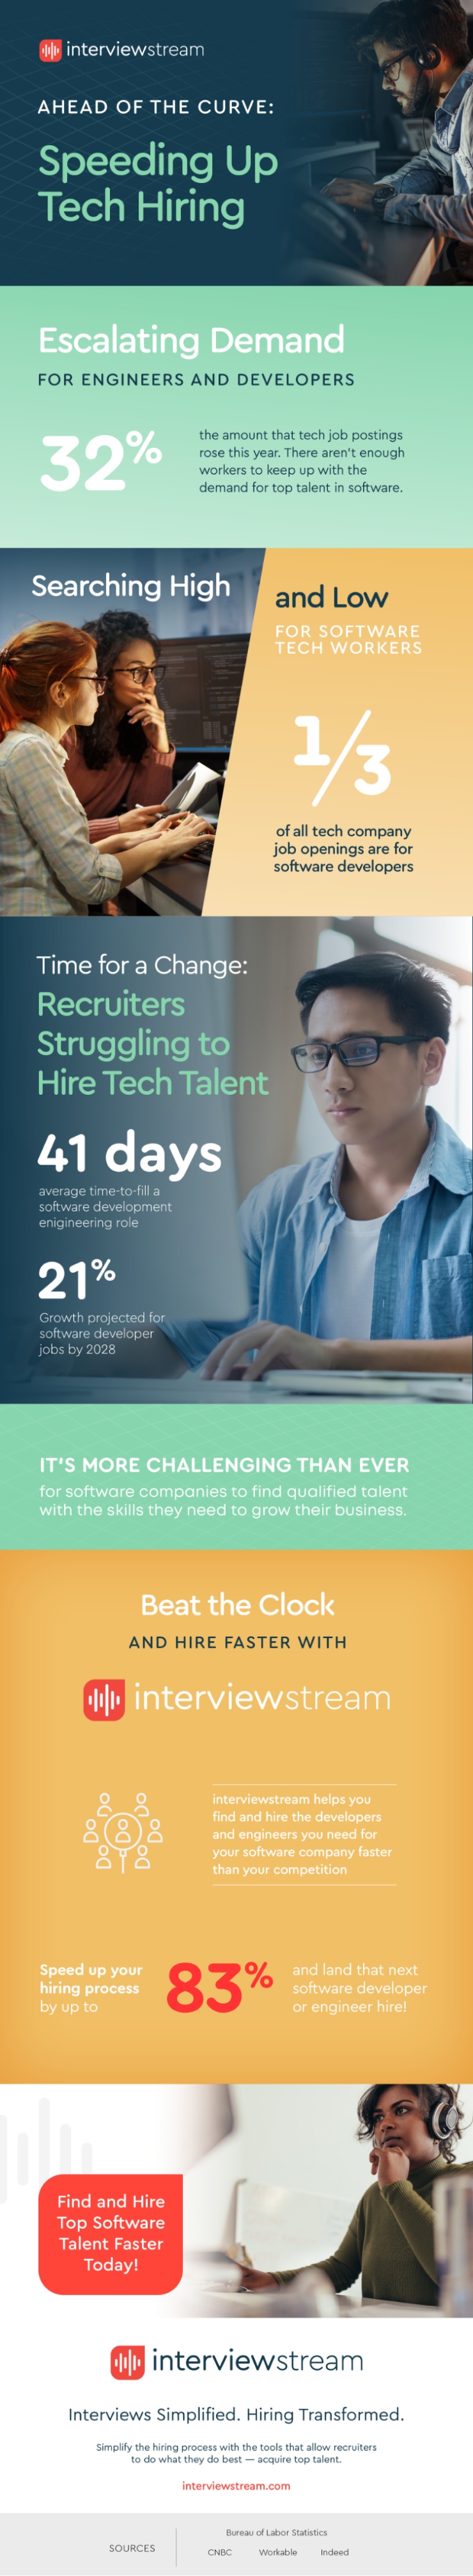 Infographic showcasing how to speed up the hiring of engineers and developers in the tech industry